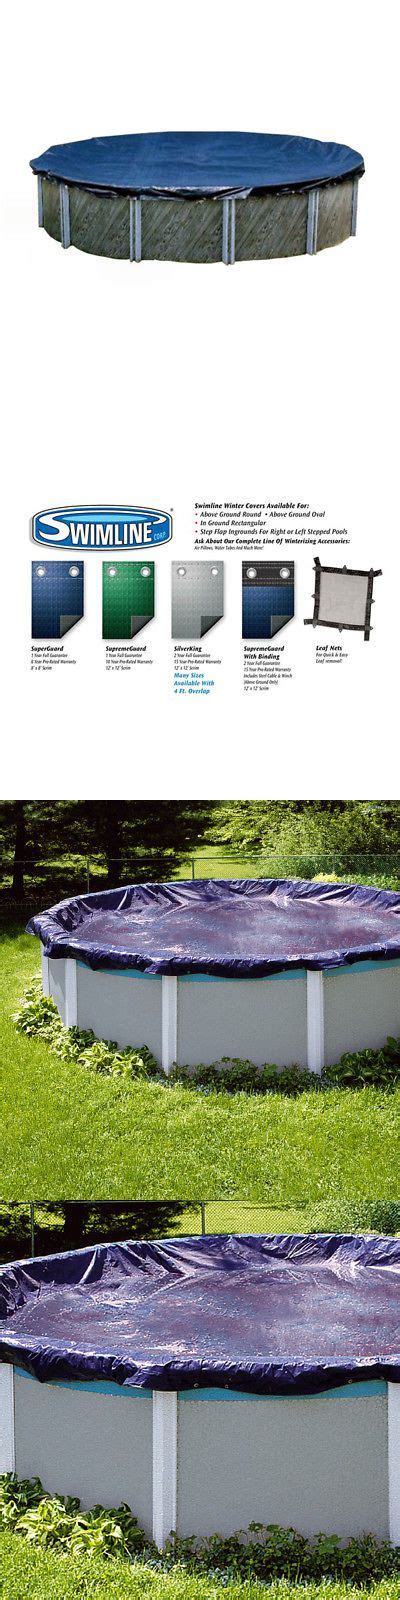 Custom in ground hot tub covers. Spa and Hot Tub Covers 181074: Swimline 15 Foot Round ...